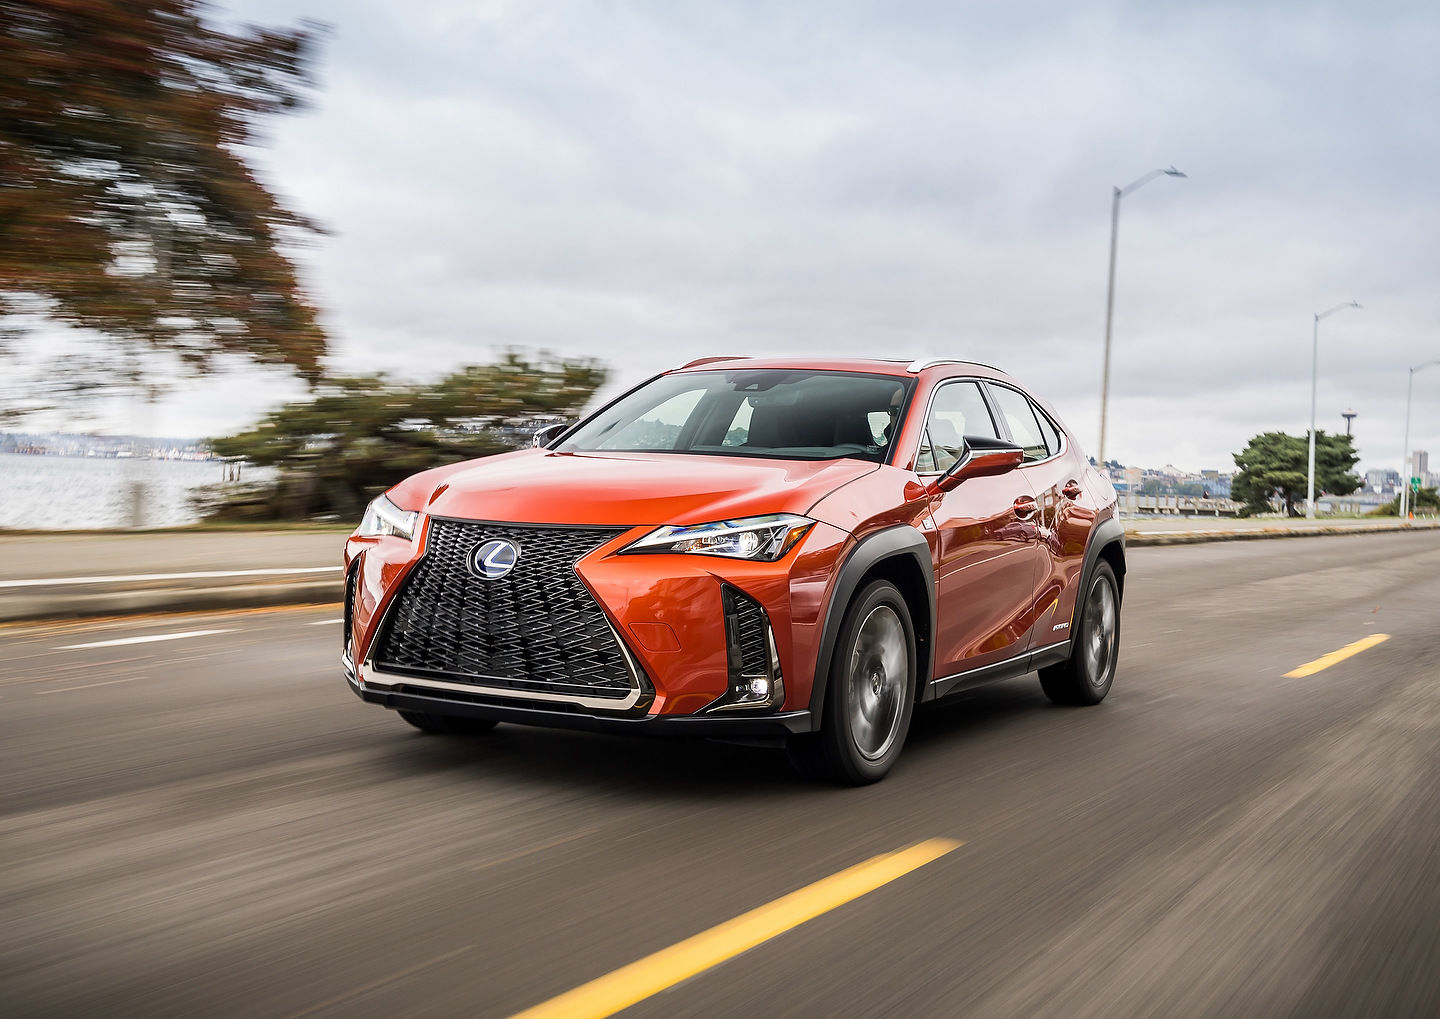 What You Want to Know About the 2019 Lexus UX